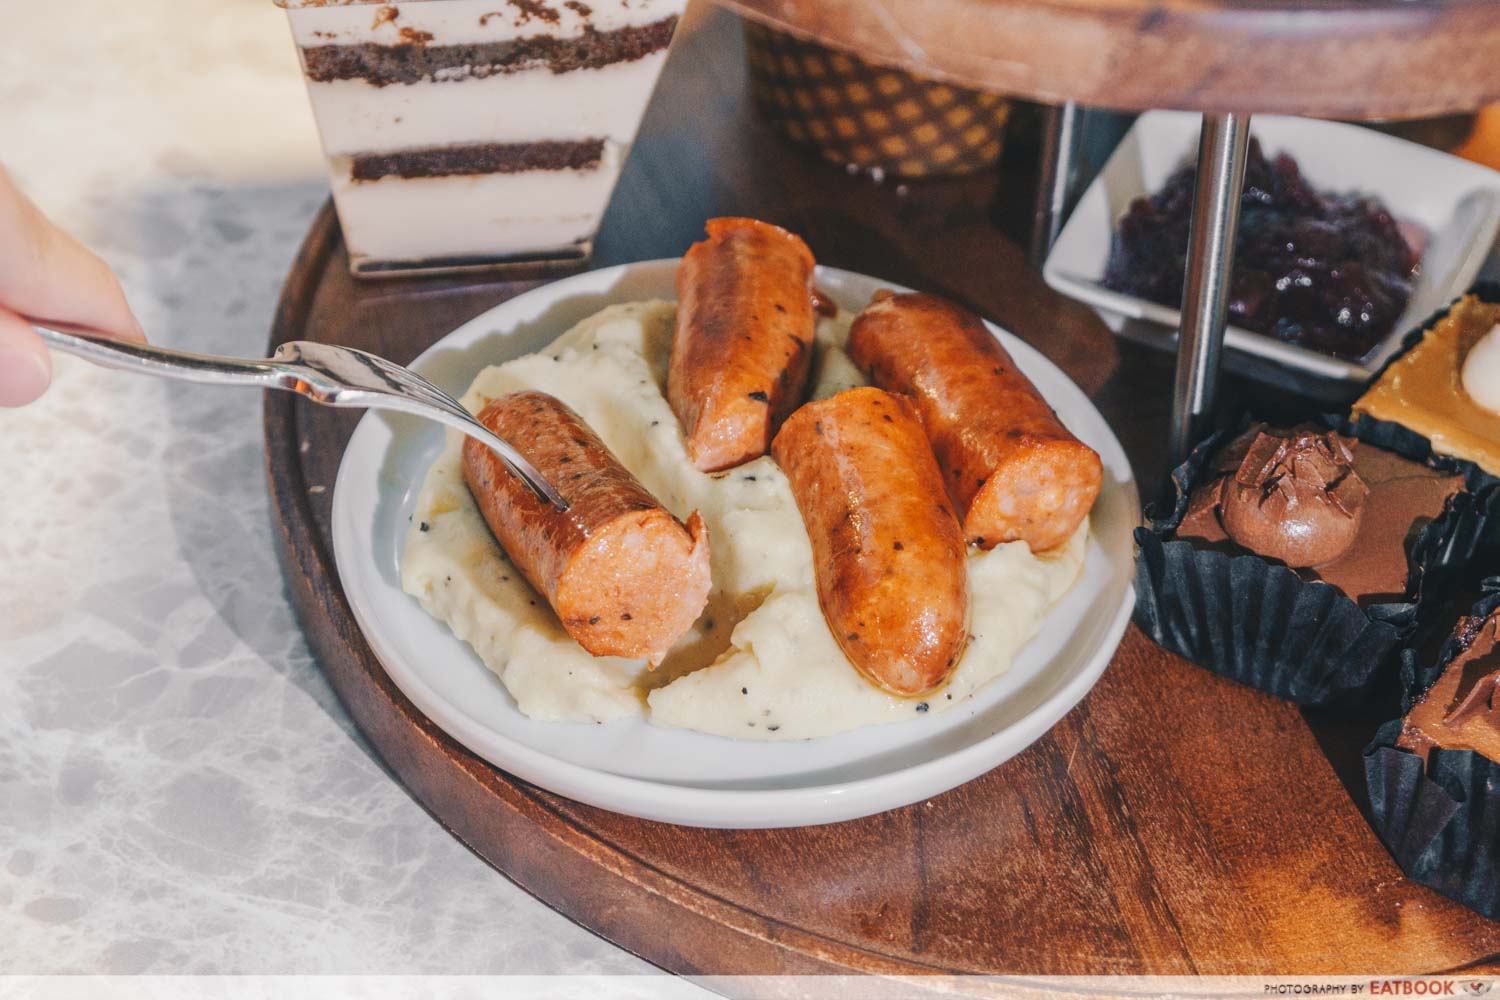 cedele afternoon tea - bangers and mash